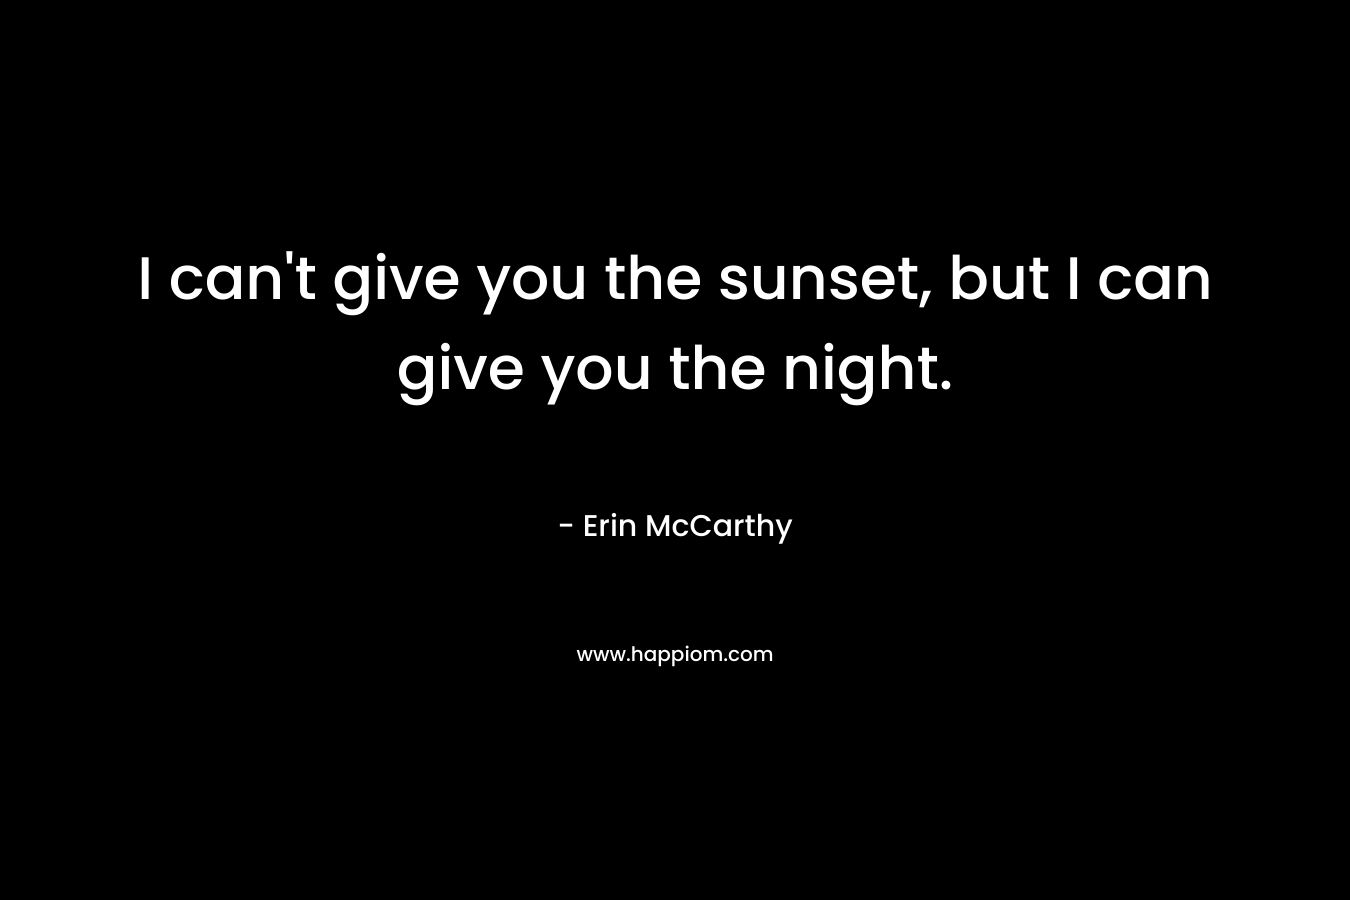 I can’t give you the sunset, but I can give you the night. – Erin McCarthy